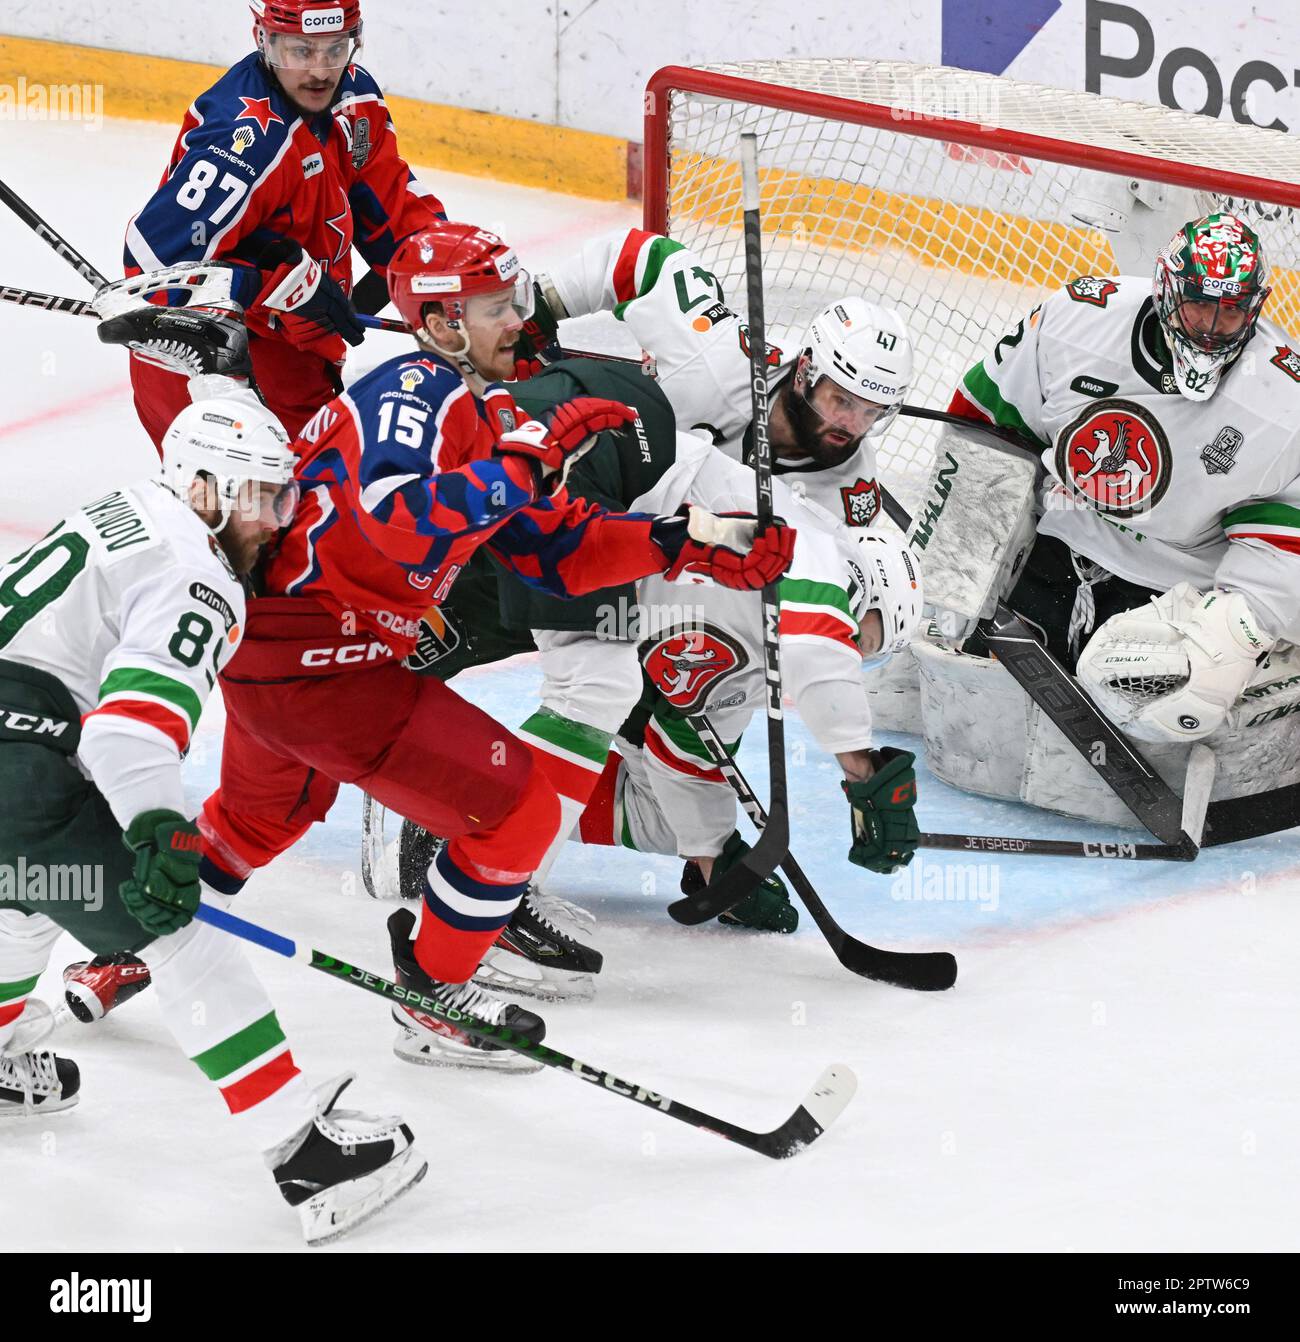 Moscow, Russia. 27th Apr, 2023. Continental Hockey League (KHL). Championship season 2022/23. Playoffs of the Gagarin Cup